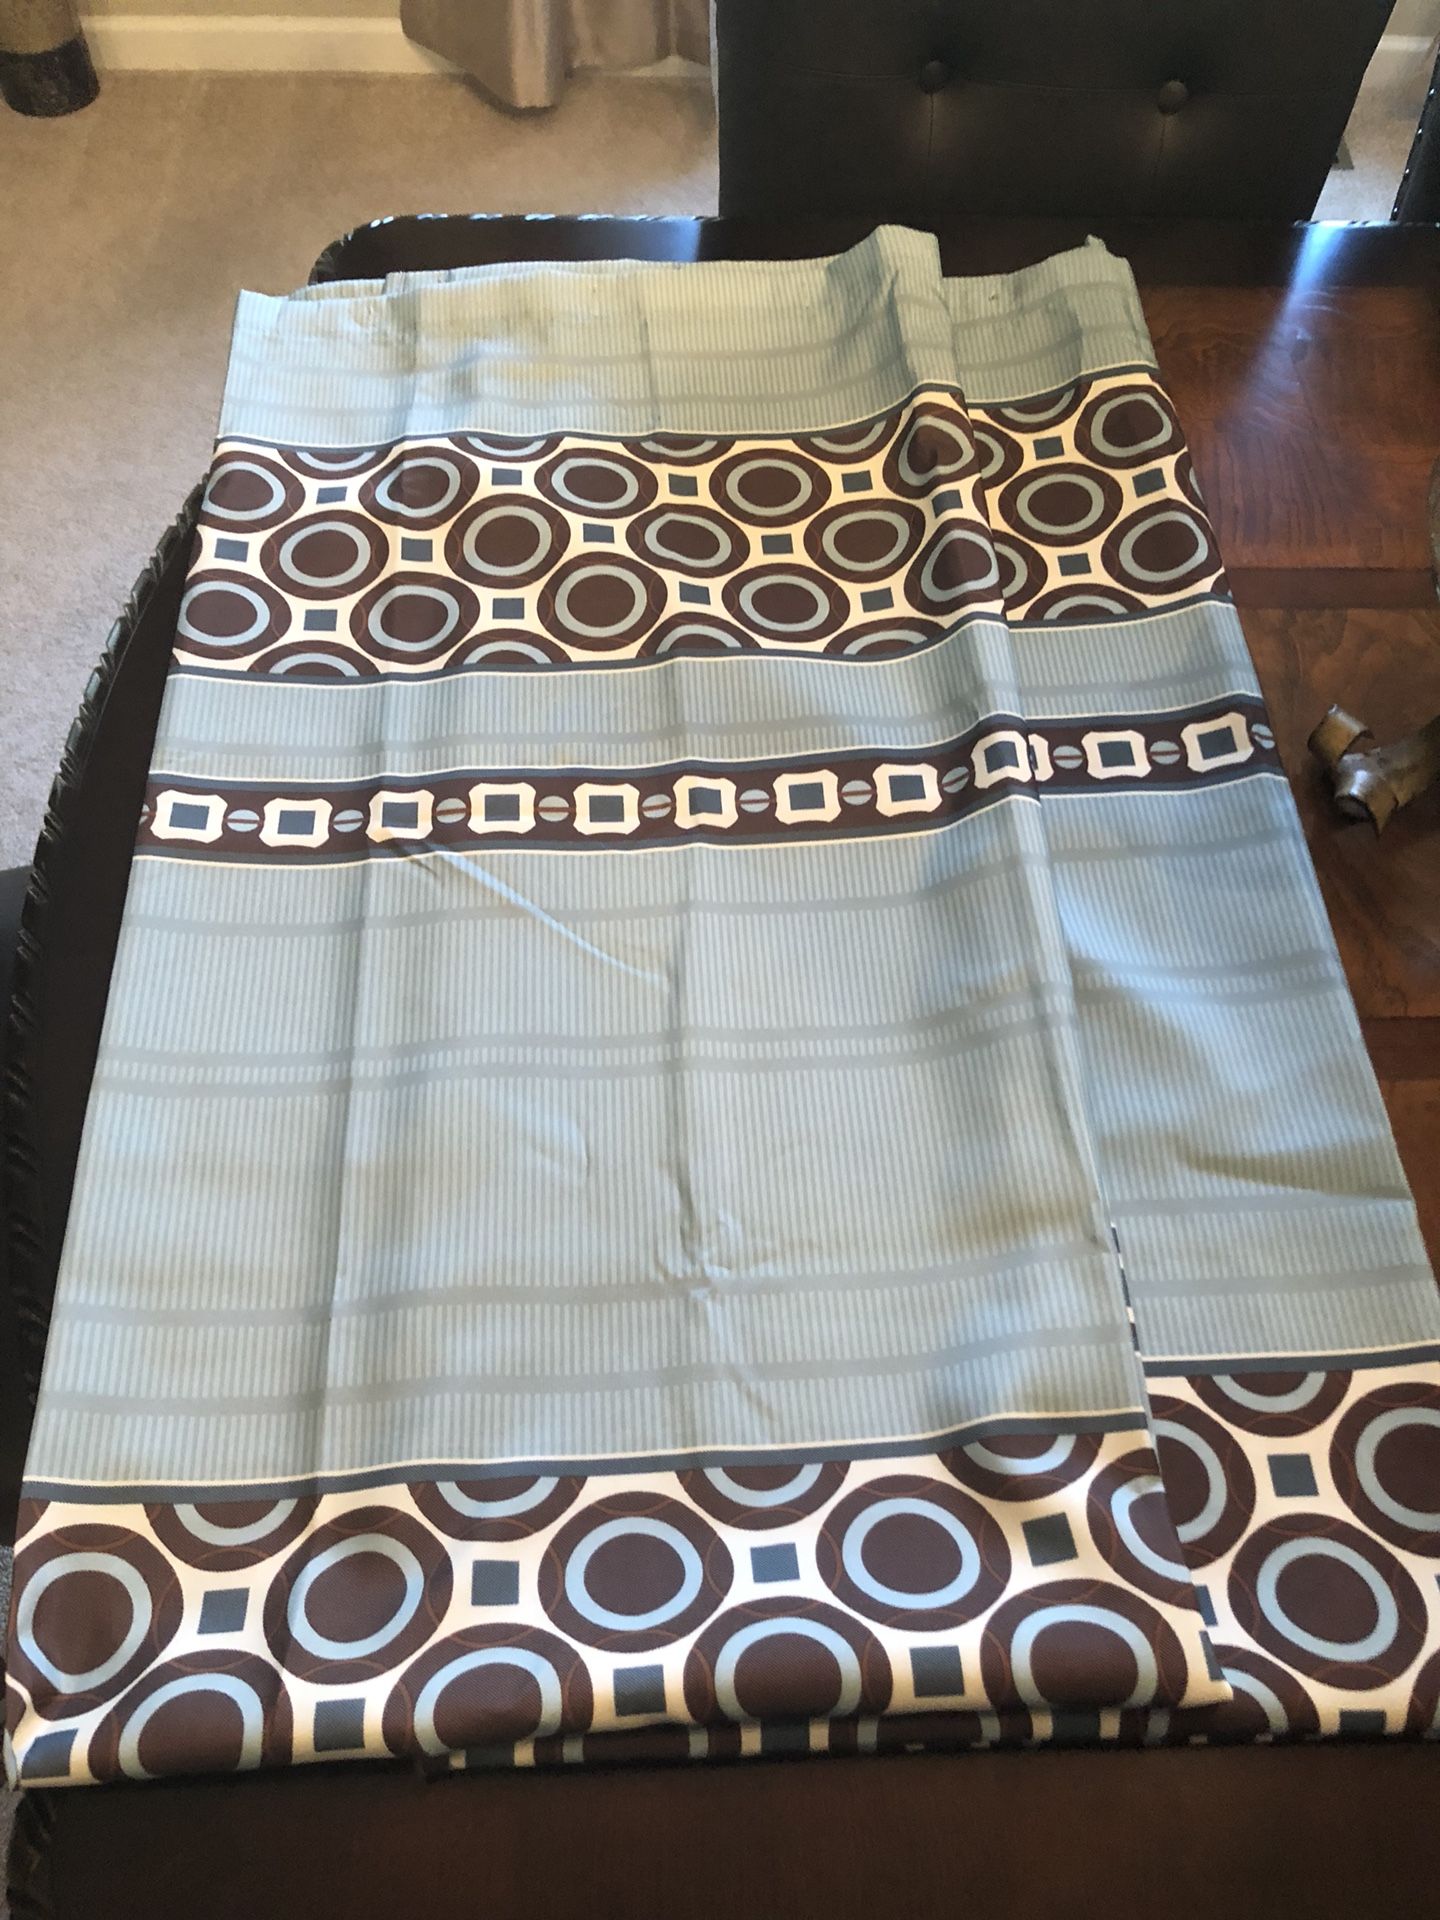 2 Teal/Brown shower curtains and sheer curtains